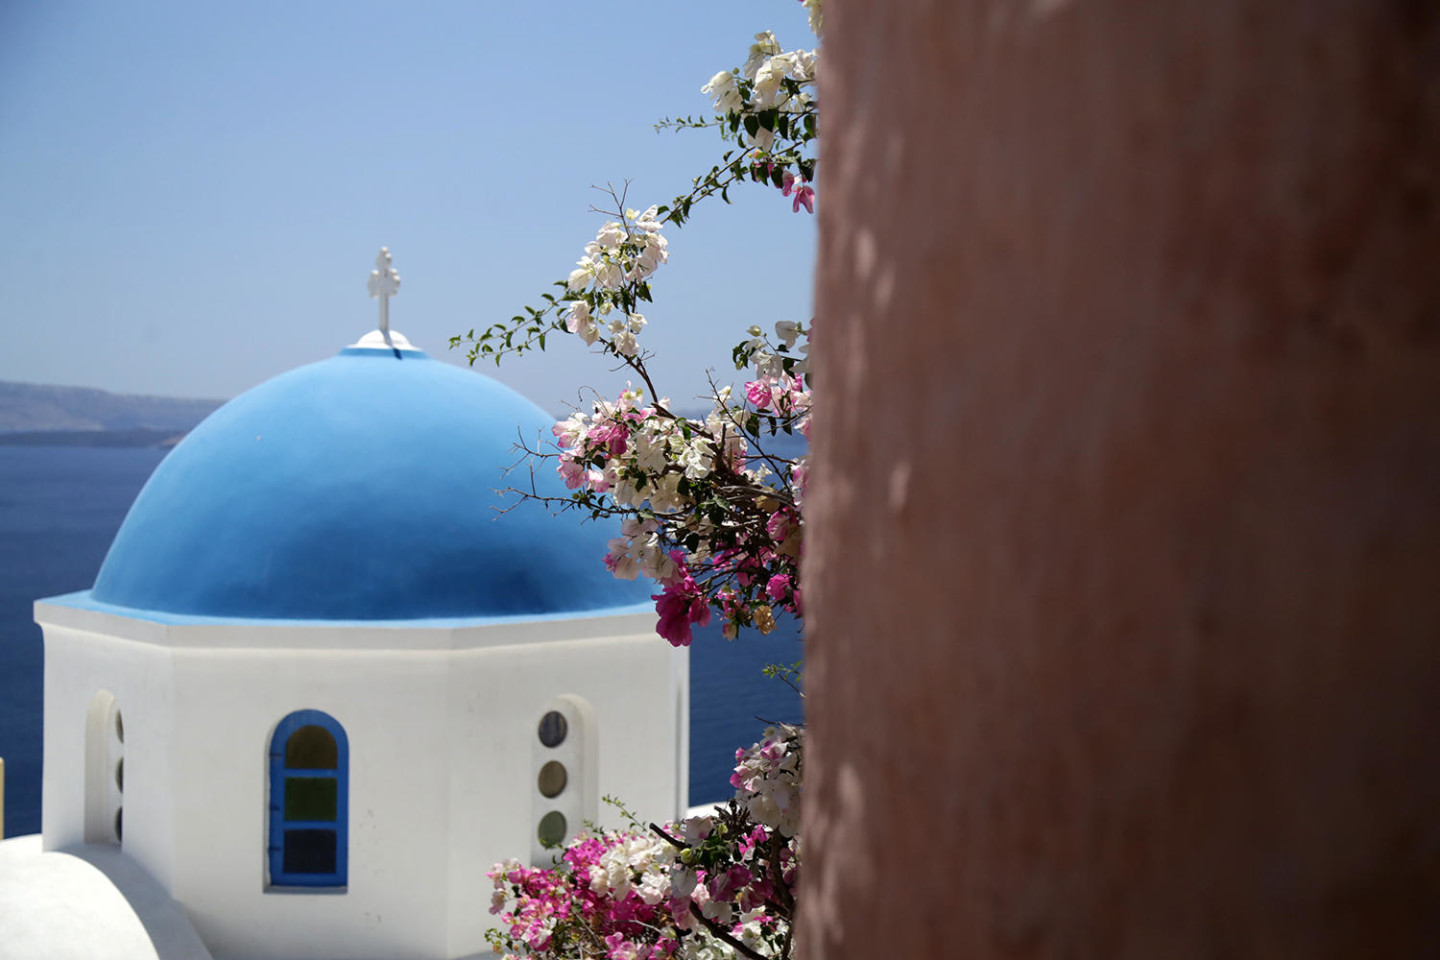 Santorini Travel Guide at Reasonable Prices